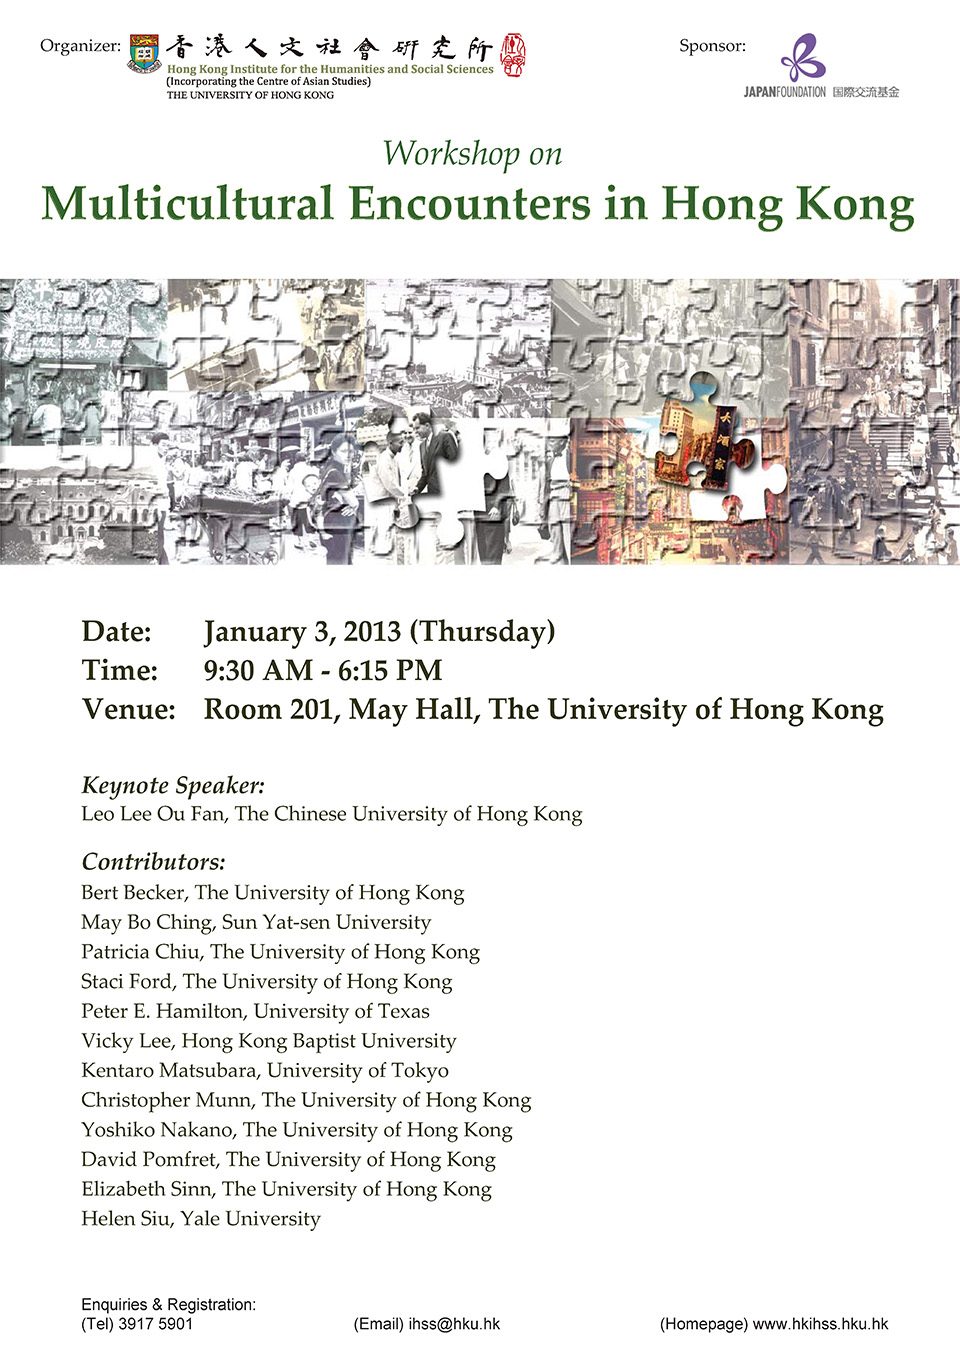 Workshop on “Multicultural Encounters in Hong Kong” (January 3, 2013)